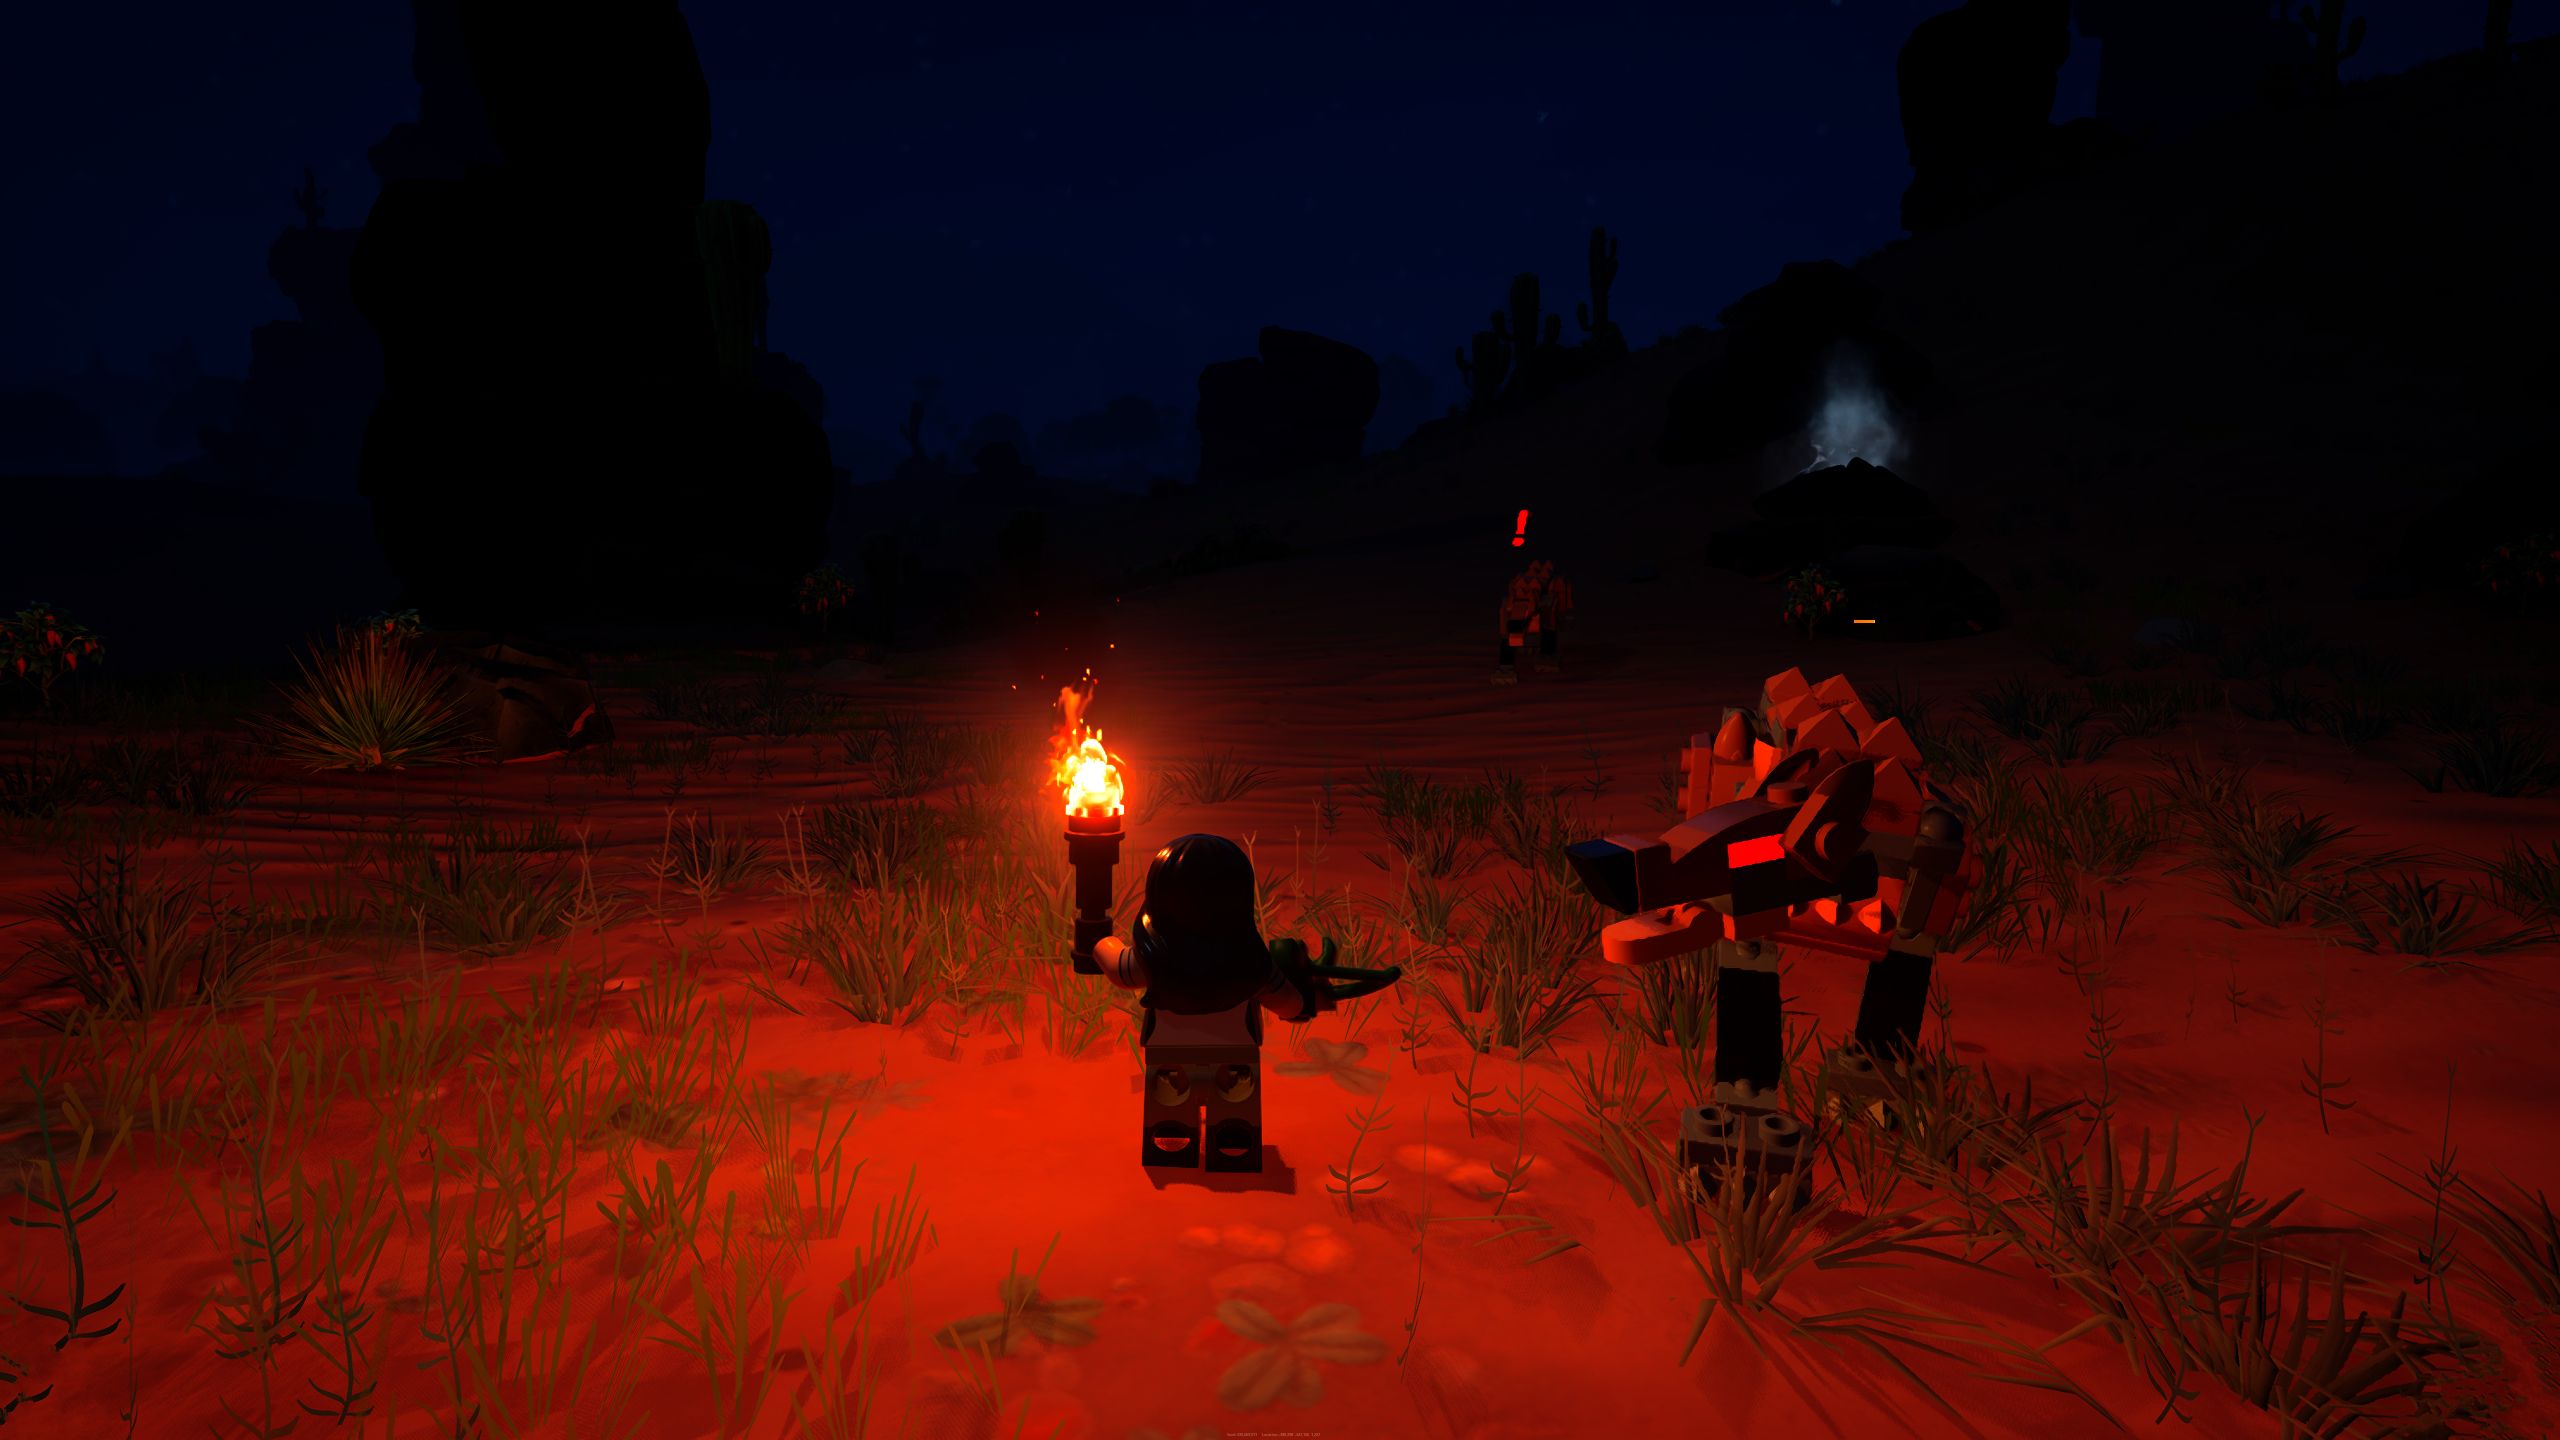 LEGO Fortnite Minifigure Holding Torch Preparing To Fight Sand Wolves With Recurve Crossbow In Desert Biome At Night